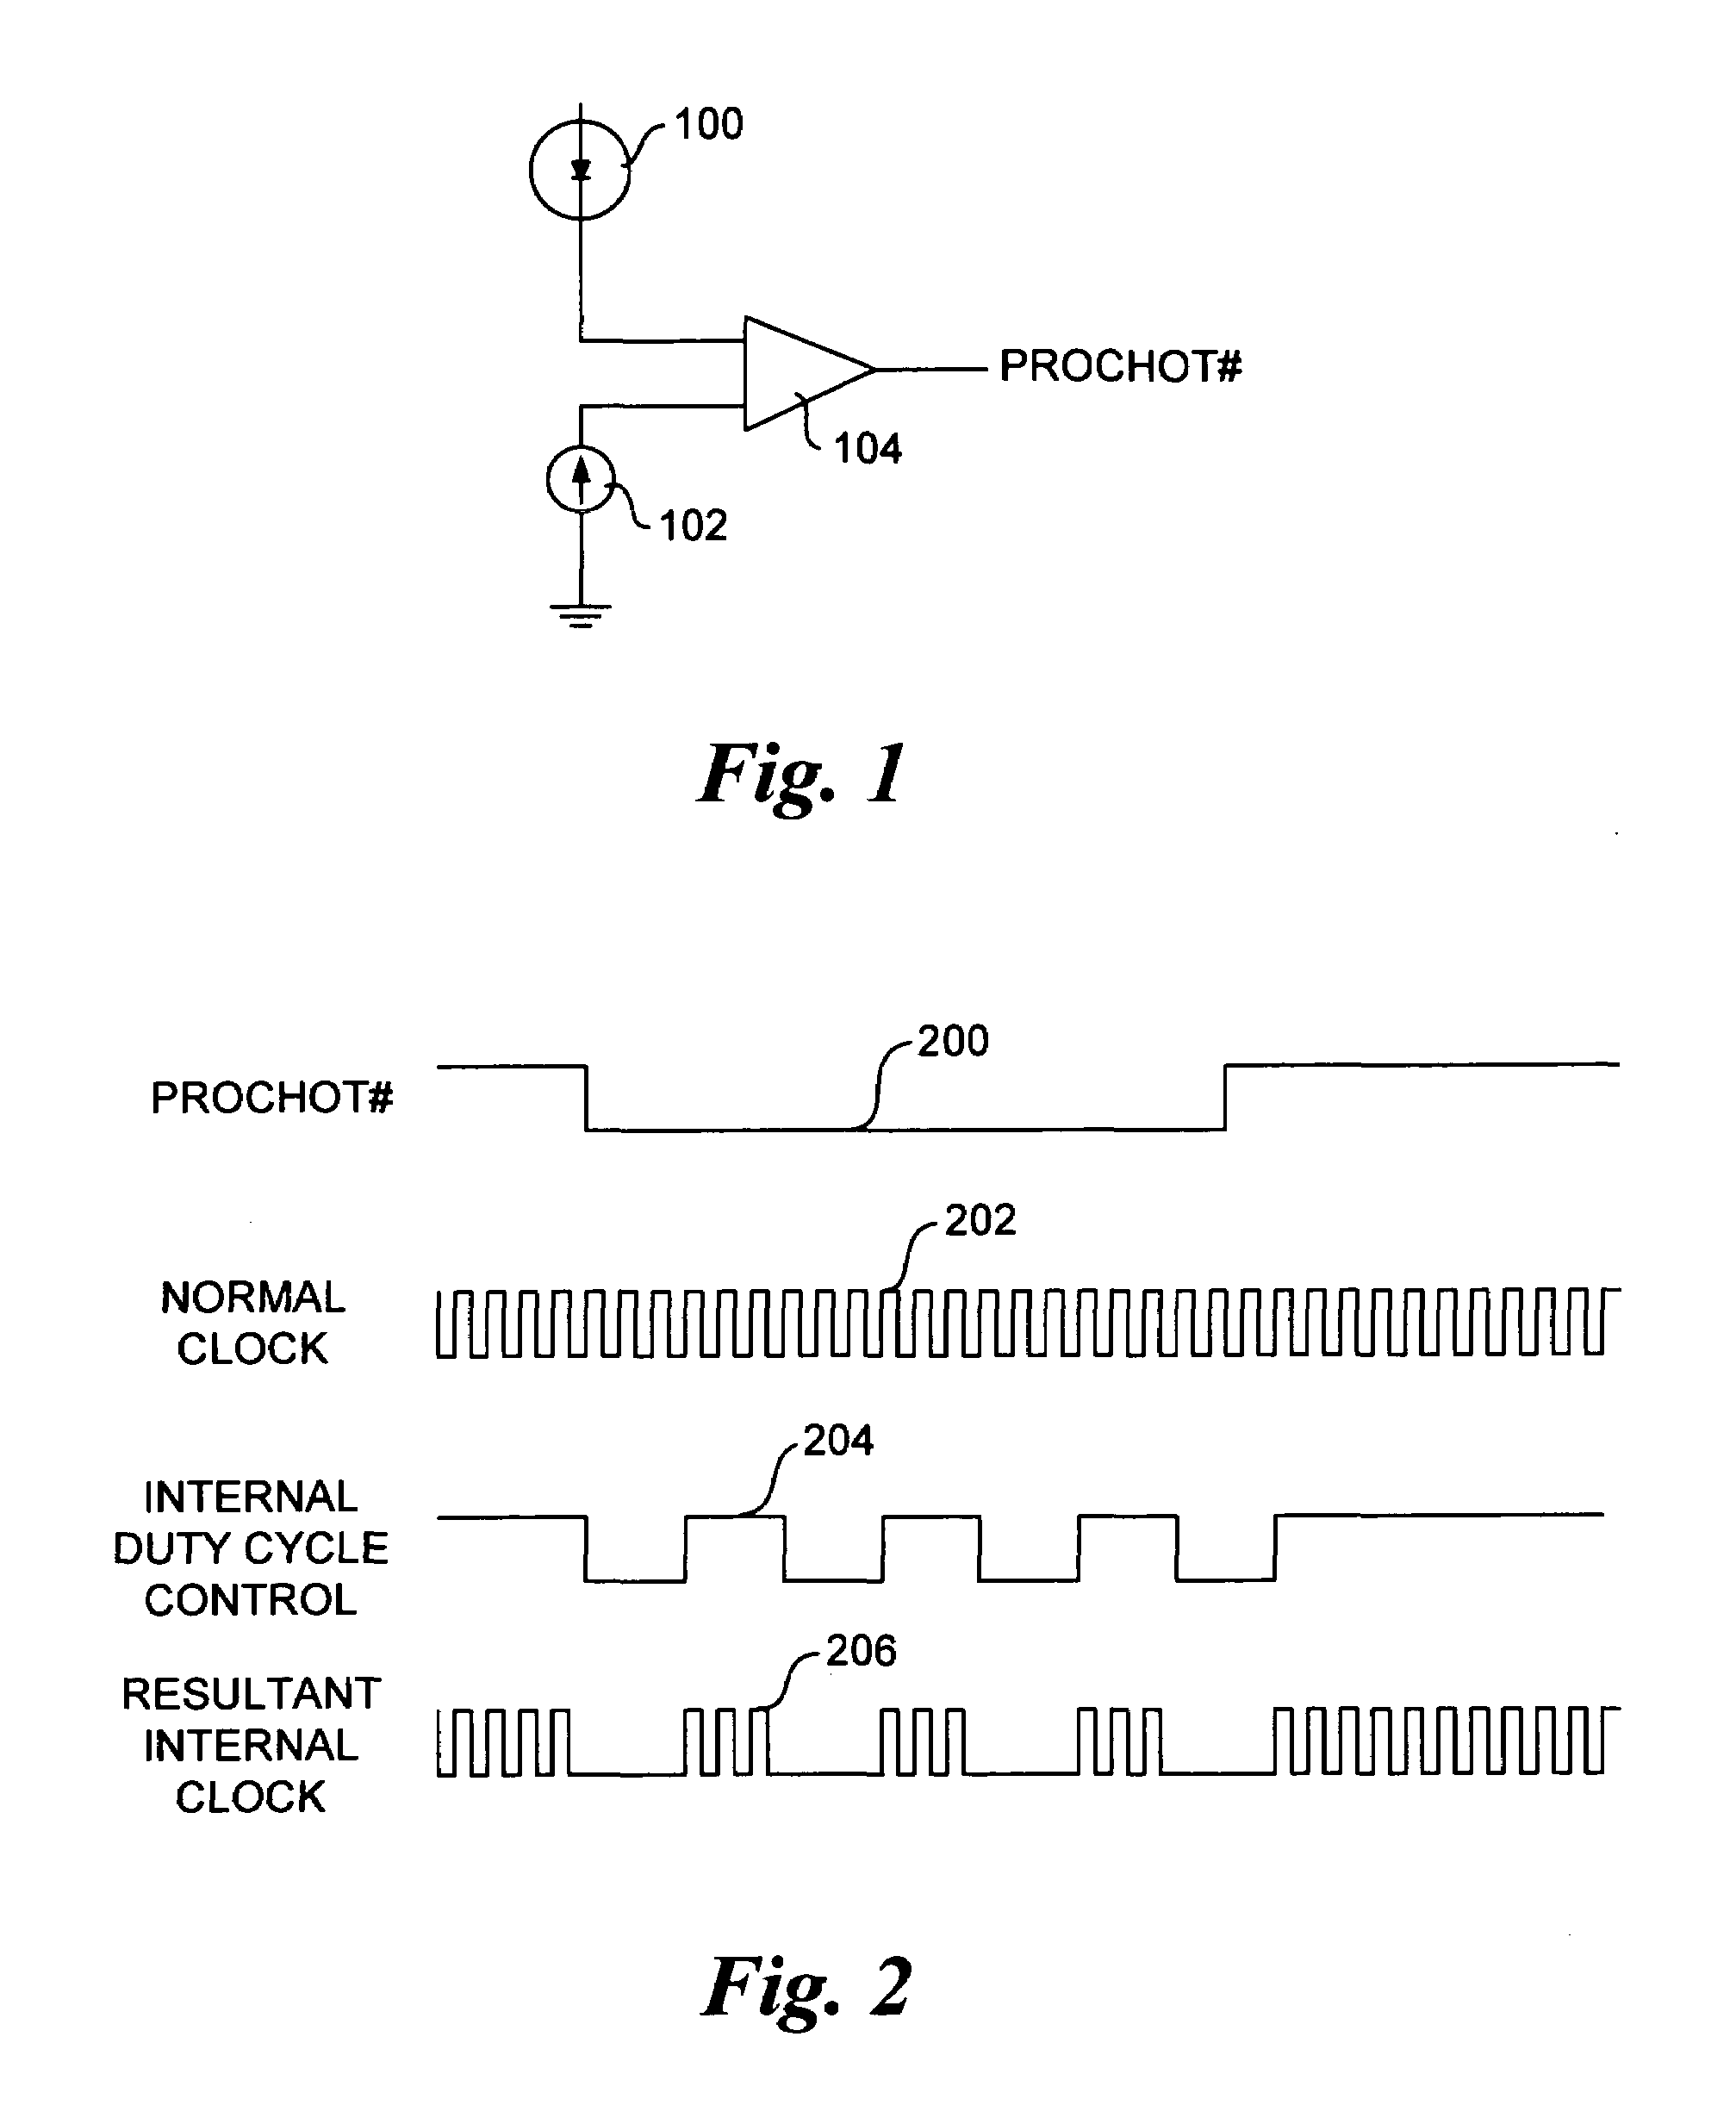 Automated method and apparatus for processor thermal validation